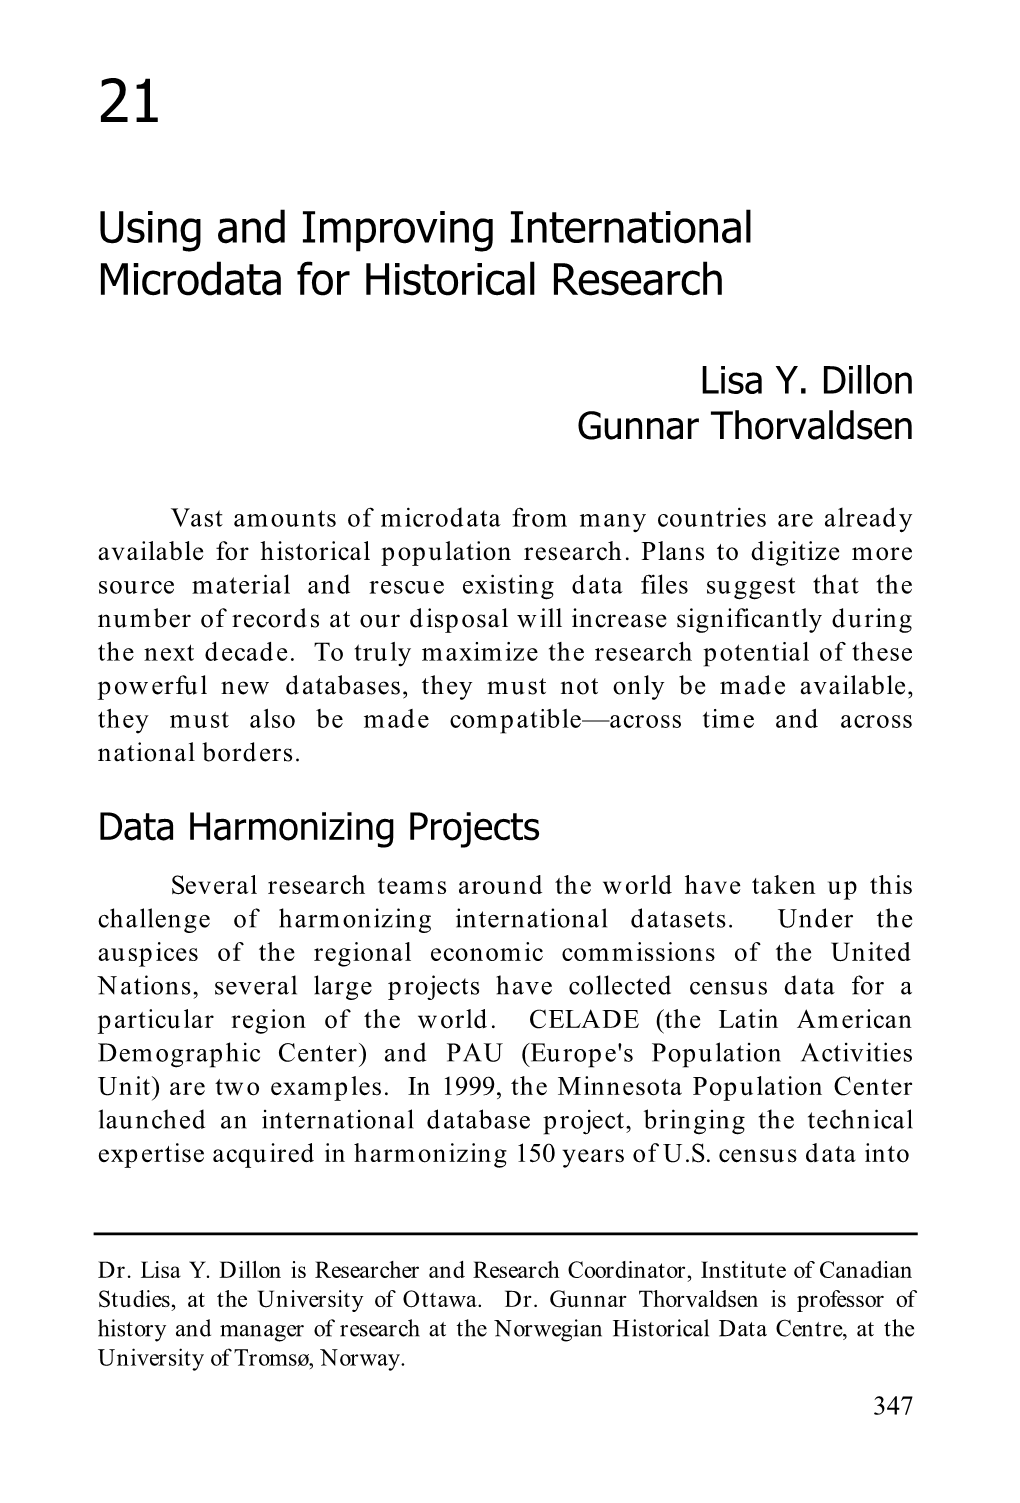 A Look Into the Future — Using and Improving International Microdata for Historical Research